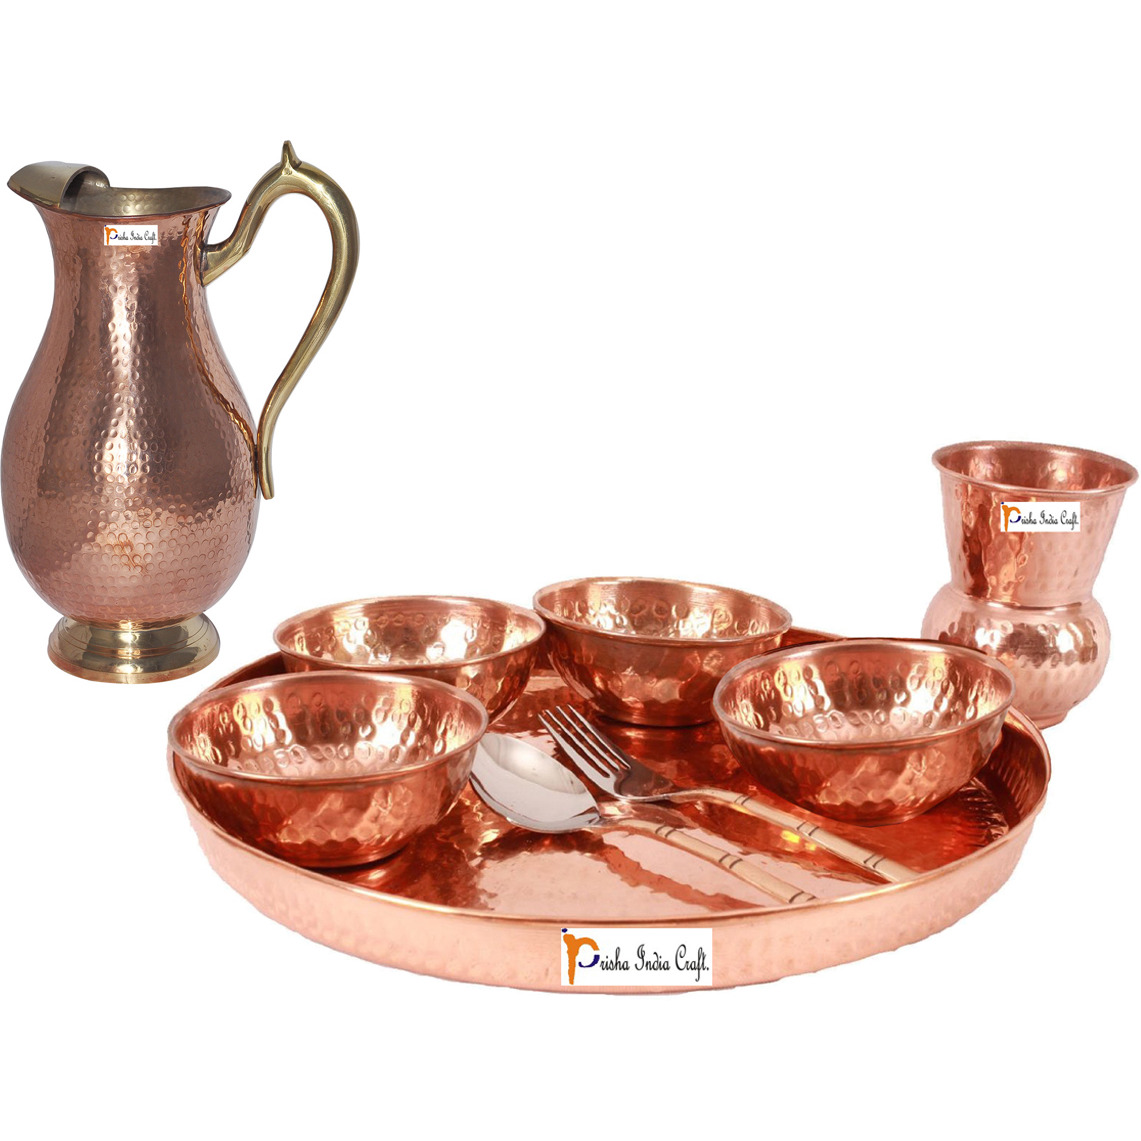 Prisha India Craft B. Dinnerware Traditional 100% Pure Copper Dinner Set of Thali Plate, Bowls, Glass and Spoon, Dia 12  With 1 Pure Copper Mughal Pitcher Jug - Christmas Gift